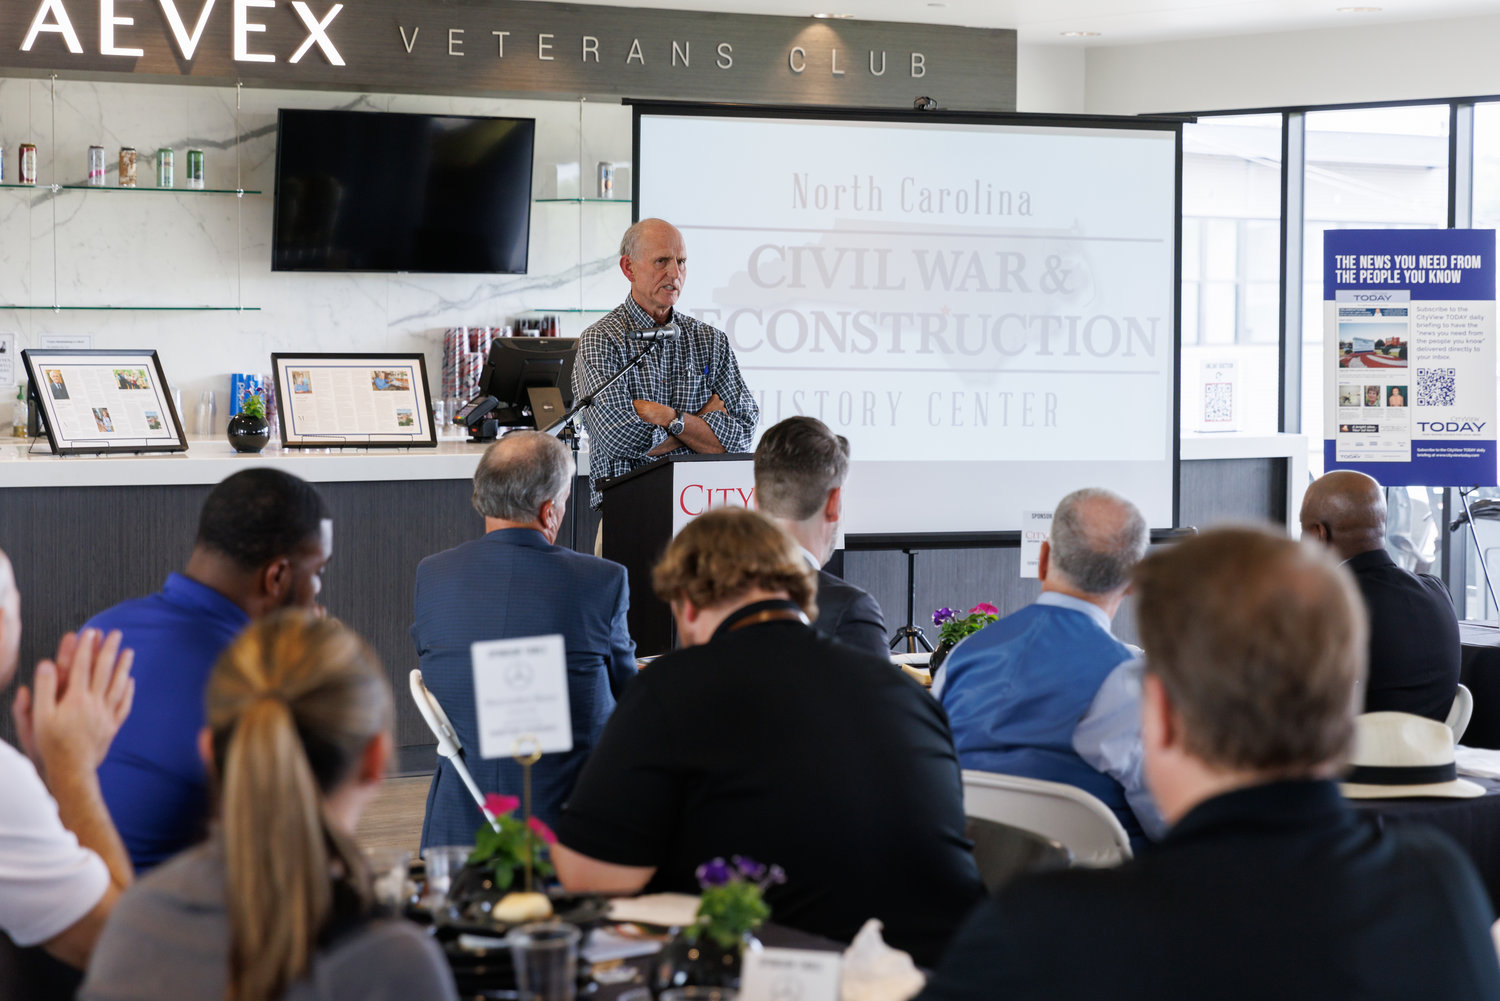 Mac Healy provides an update on the N.C. Civil War & Reconstruction History Center during the 2022 CityView Downtown Visionaries Luncheon Wednesday at Segra Stadium.